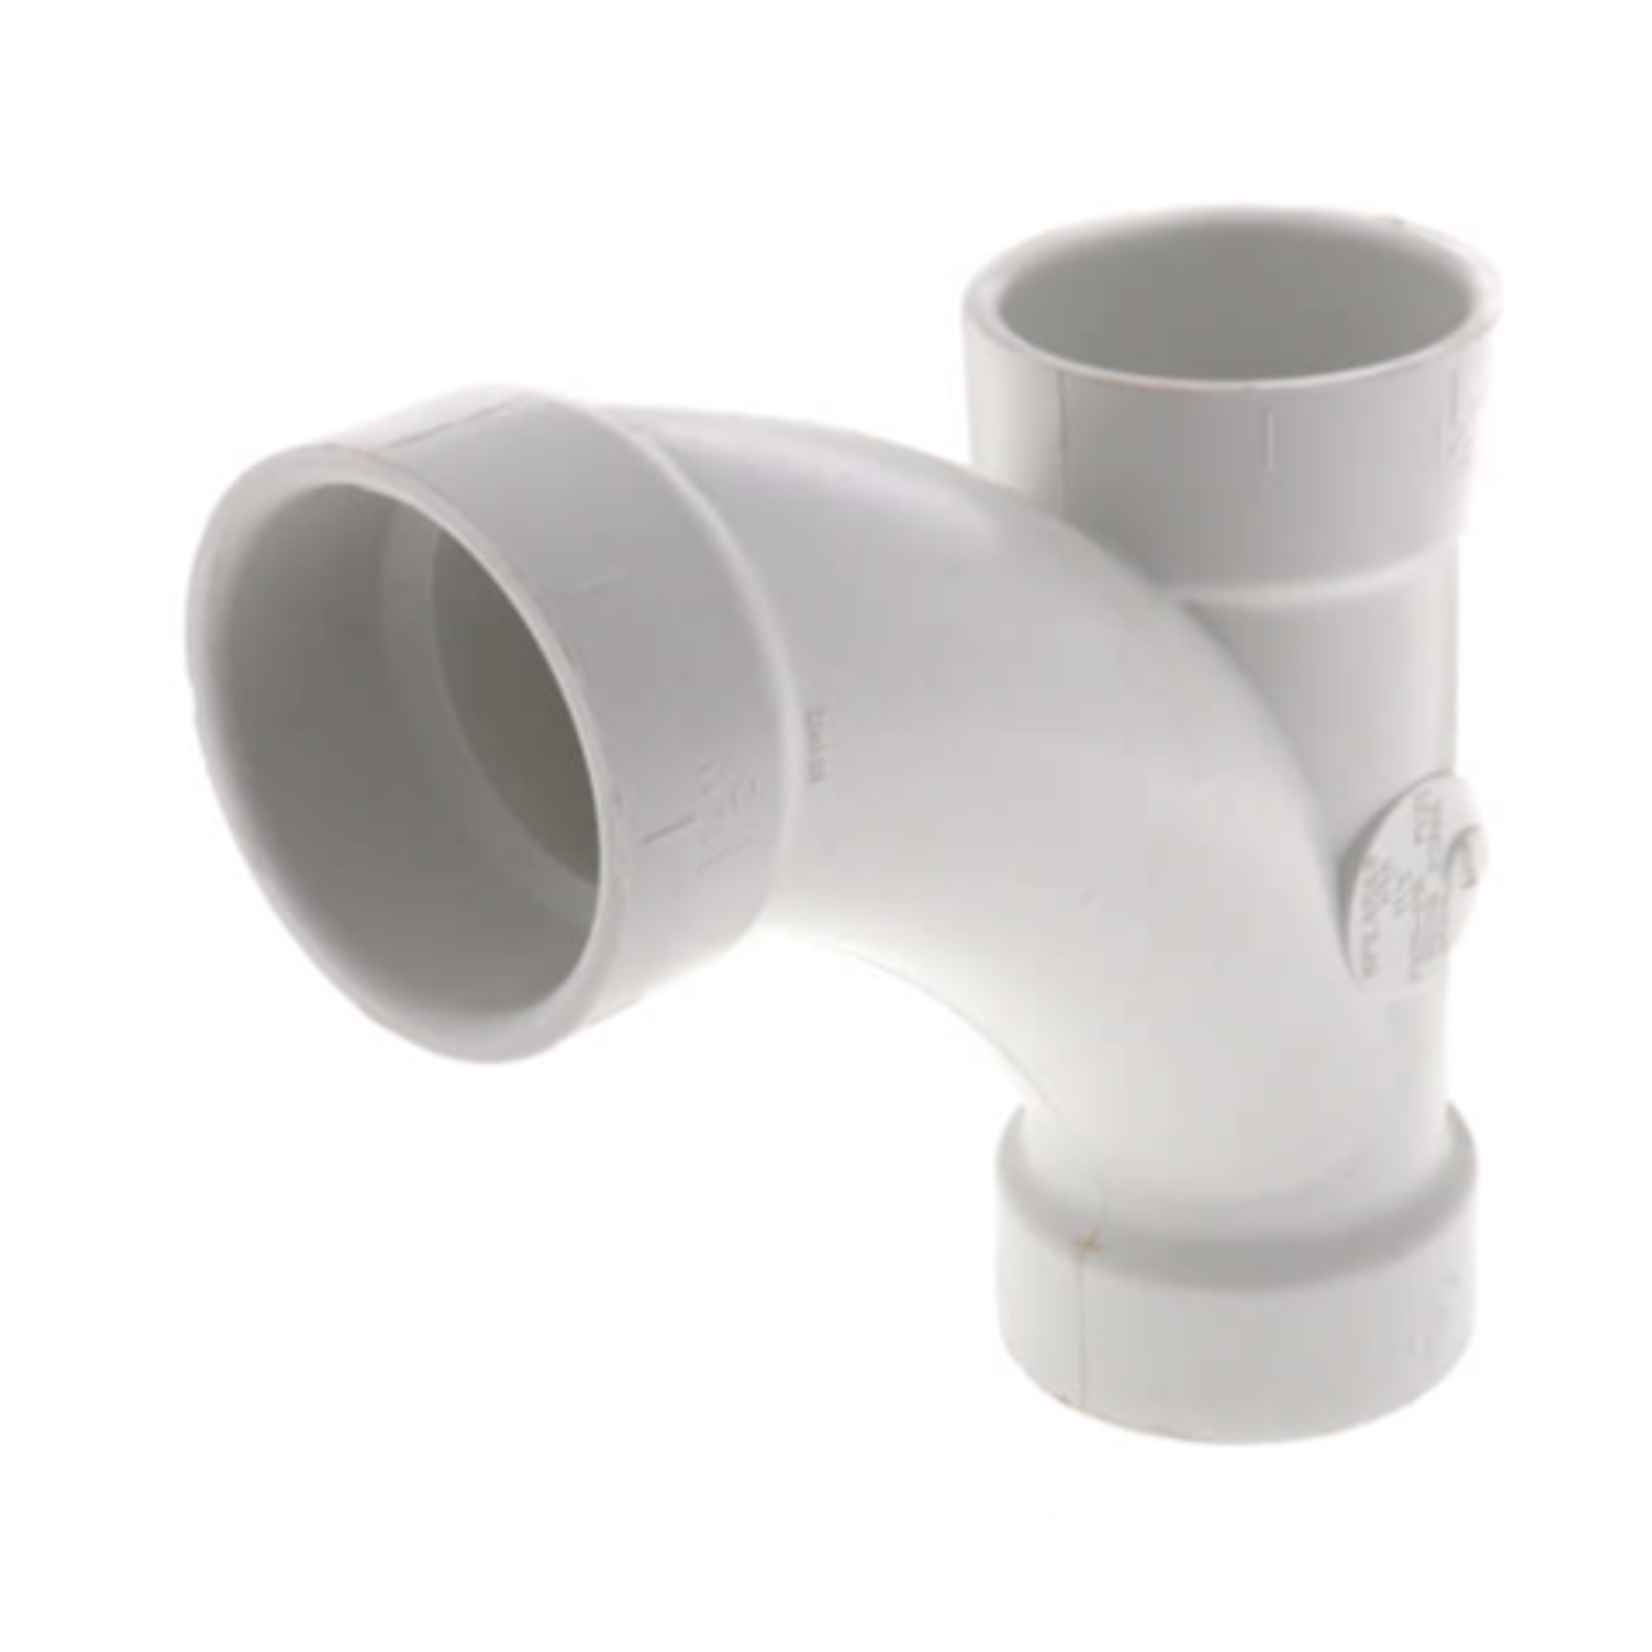 NIBCO 1 1/2 IN PVC SCHEDULE 40 DWV WYE AND 45 DEGREE ELBOW COMBO